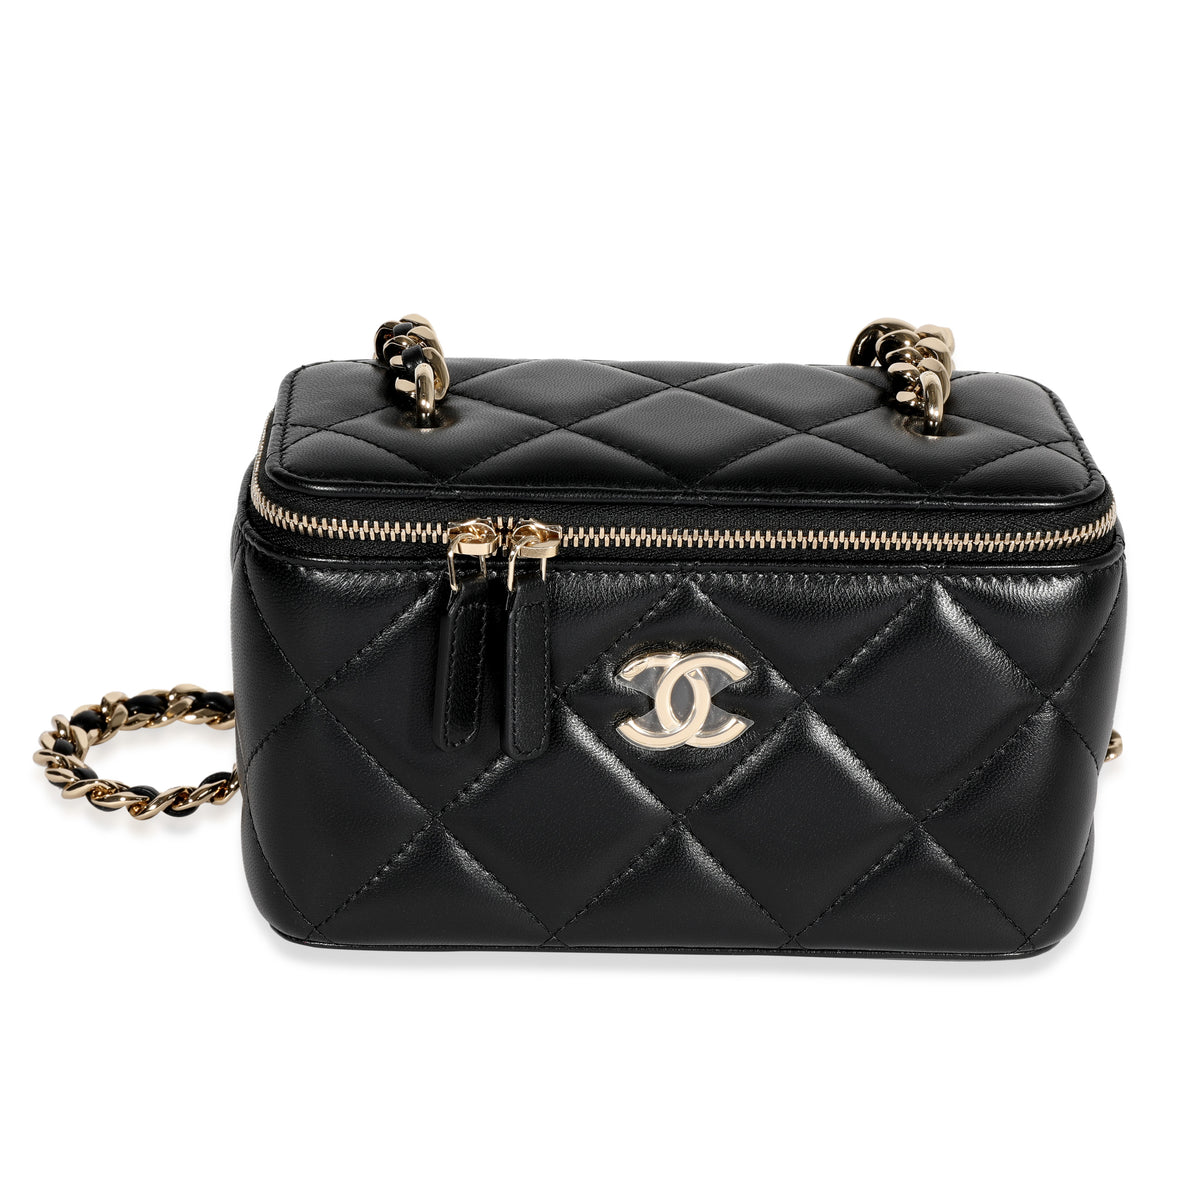 CHANEL, Bags, Chanel 2a Black Vanity With Chain Top Handle Quilted  Lambskin Crossbody Bag Box